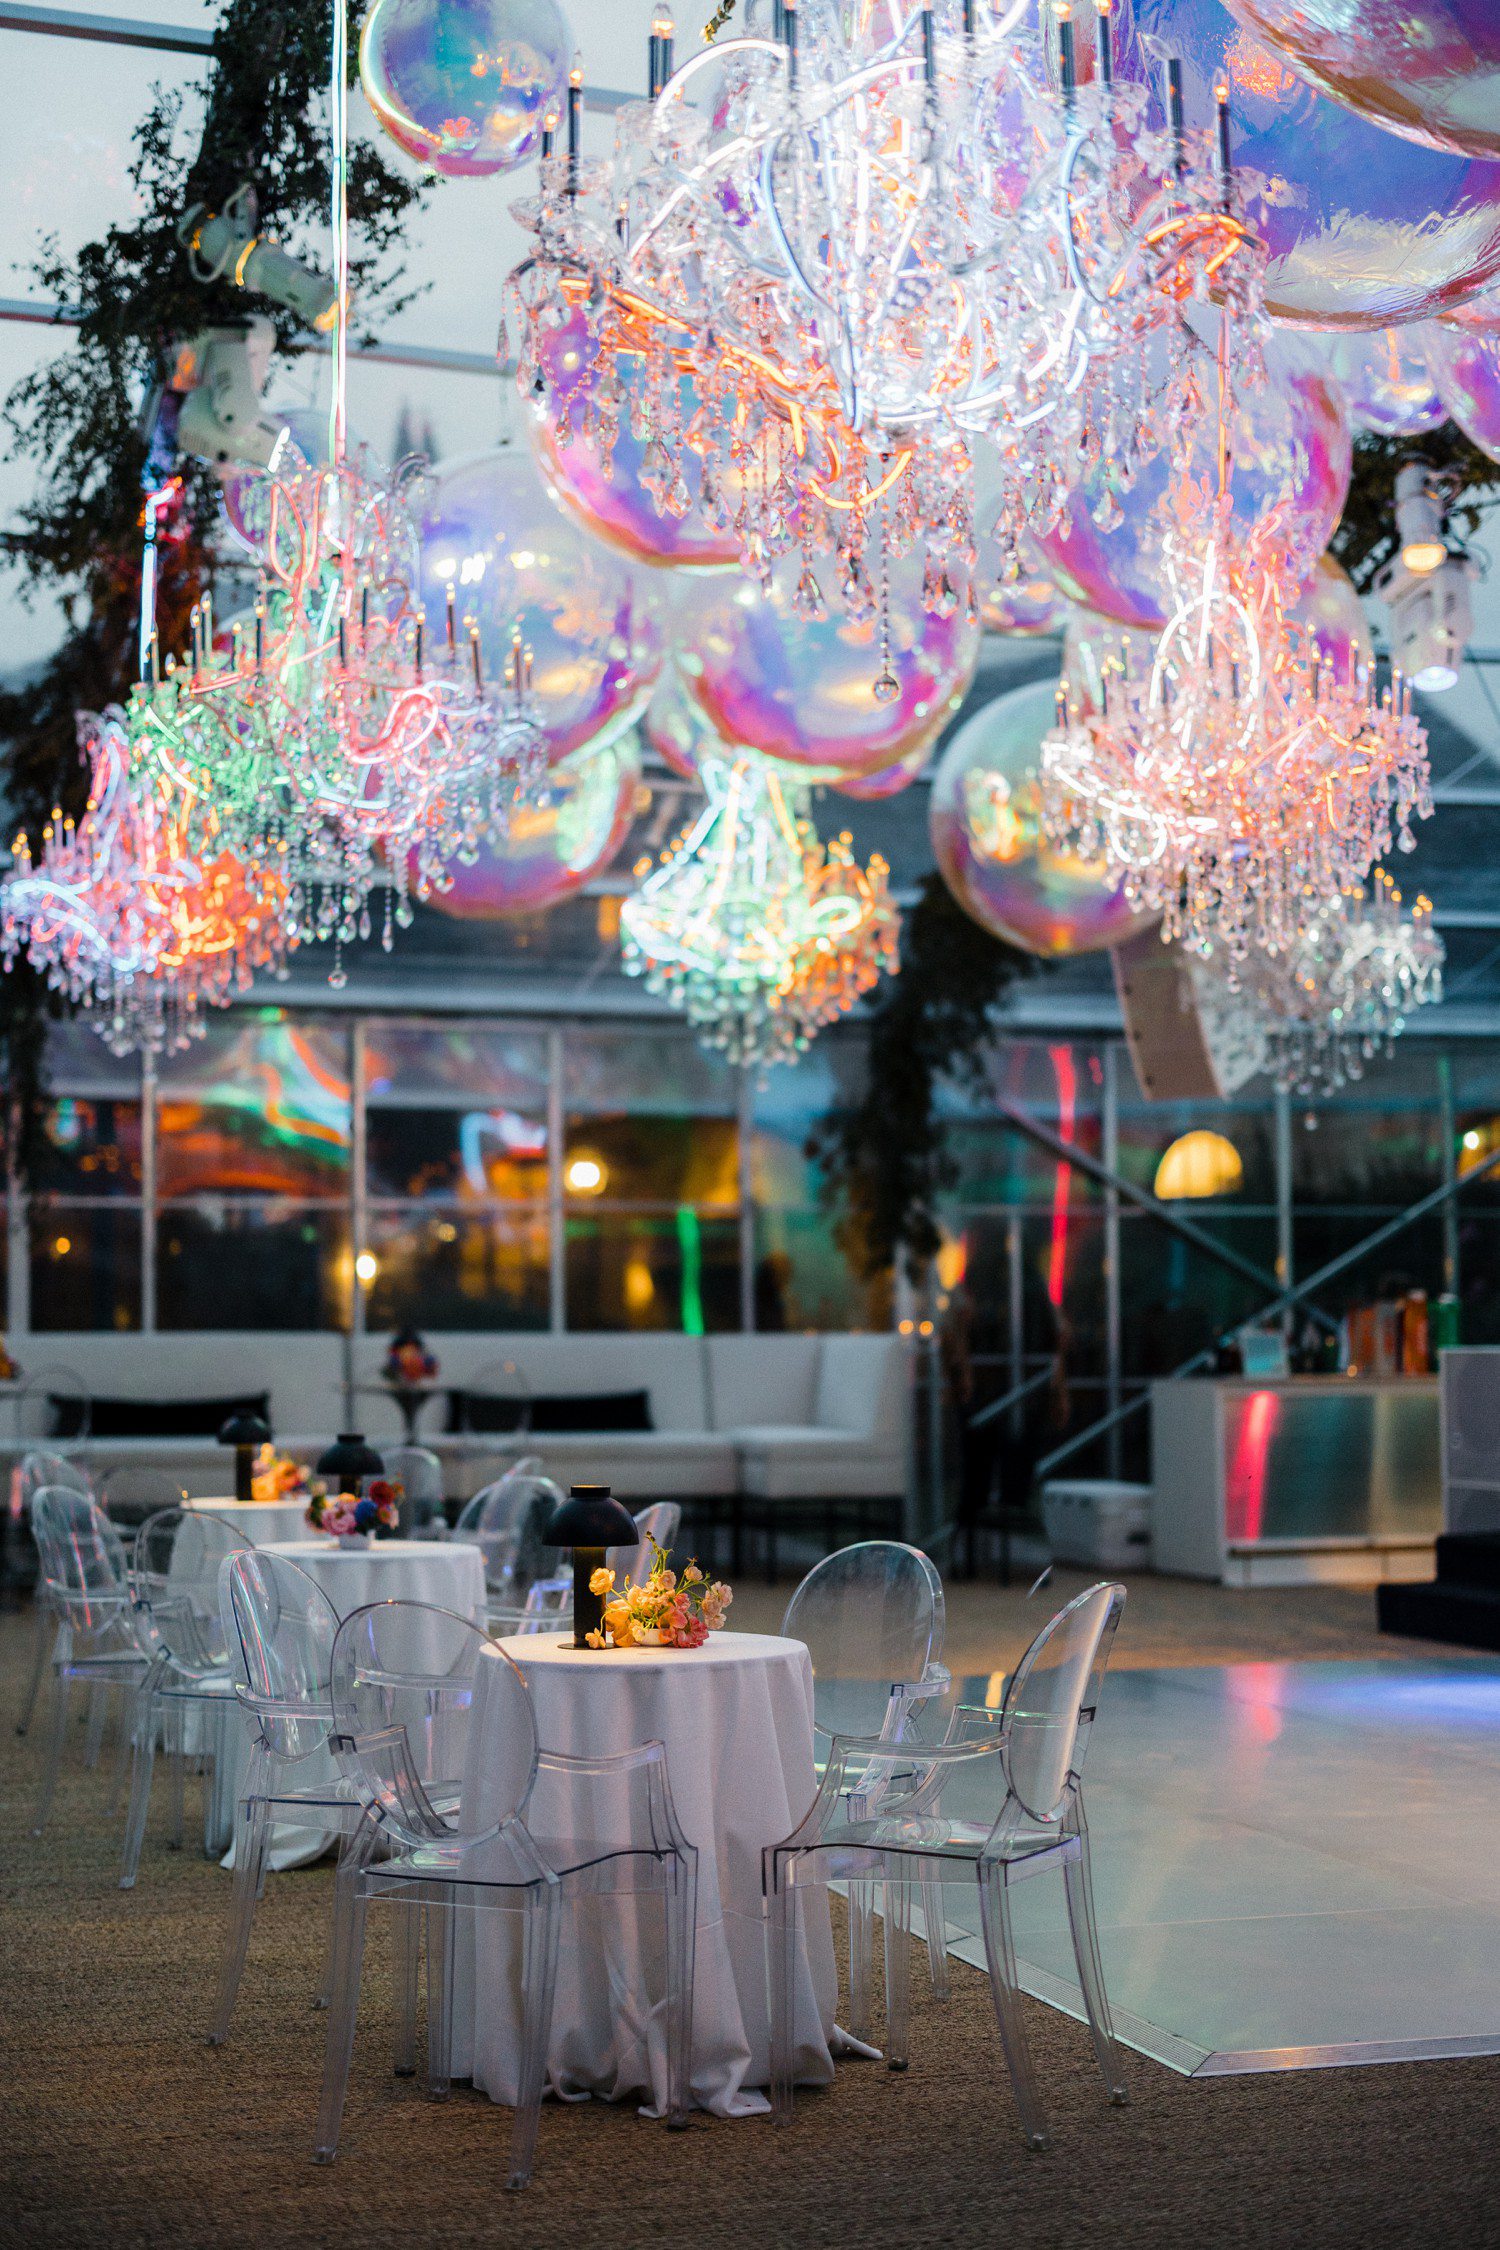 Wedding dance floor ceiling with chandeliers wrapped in neon lights and balloons.